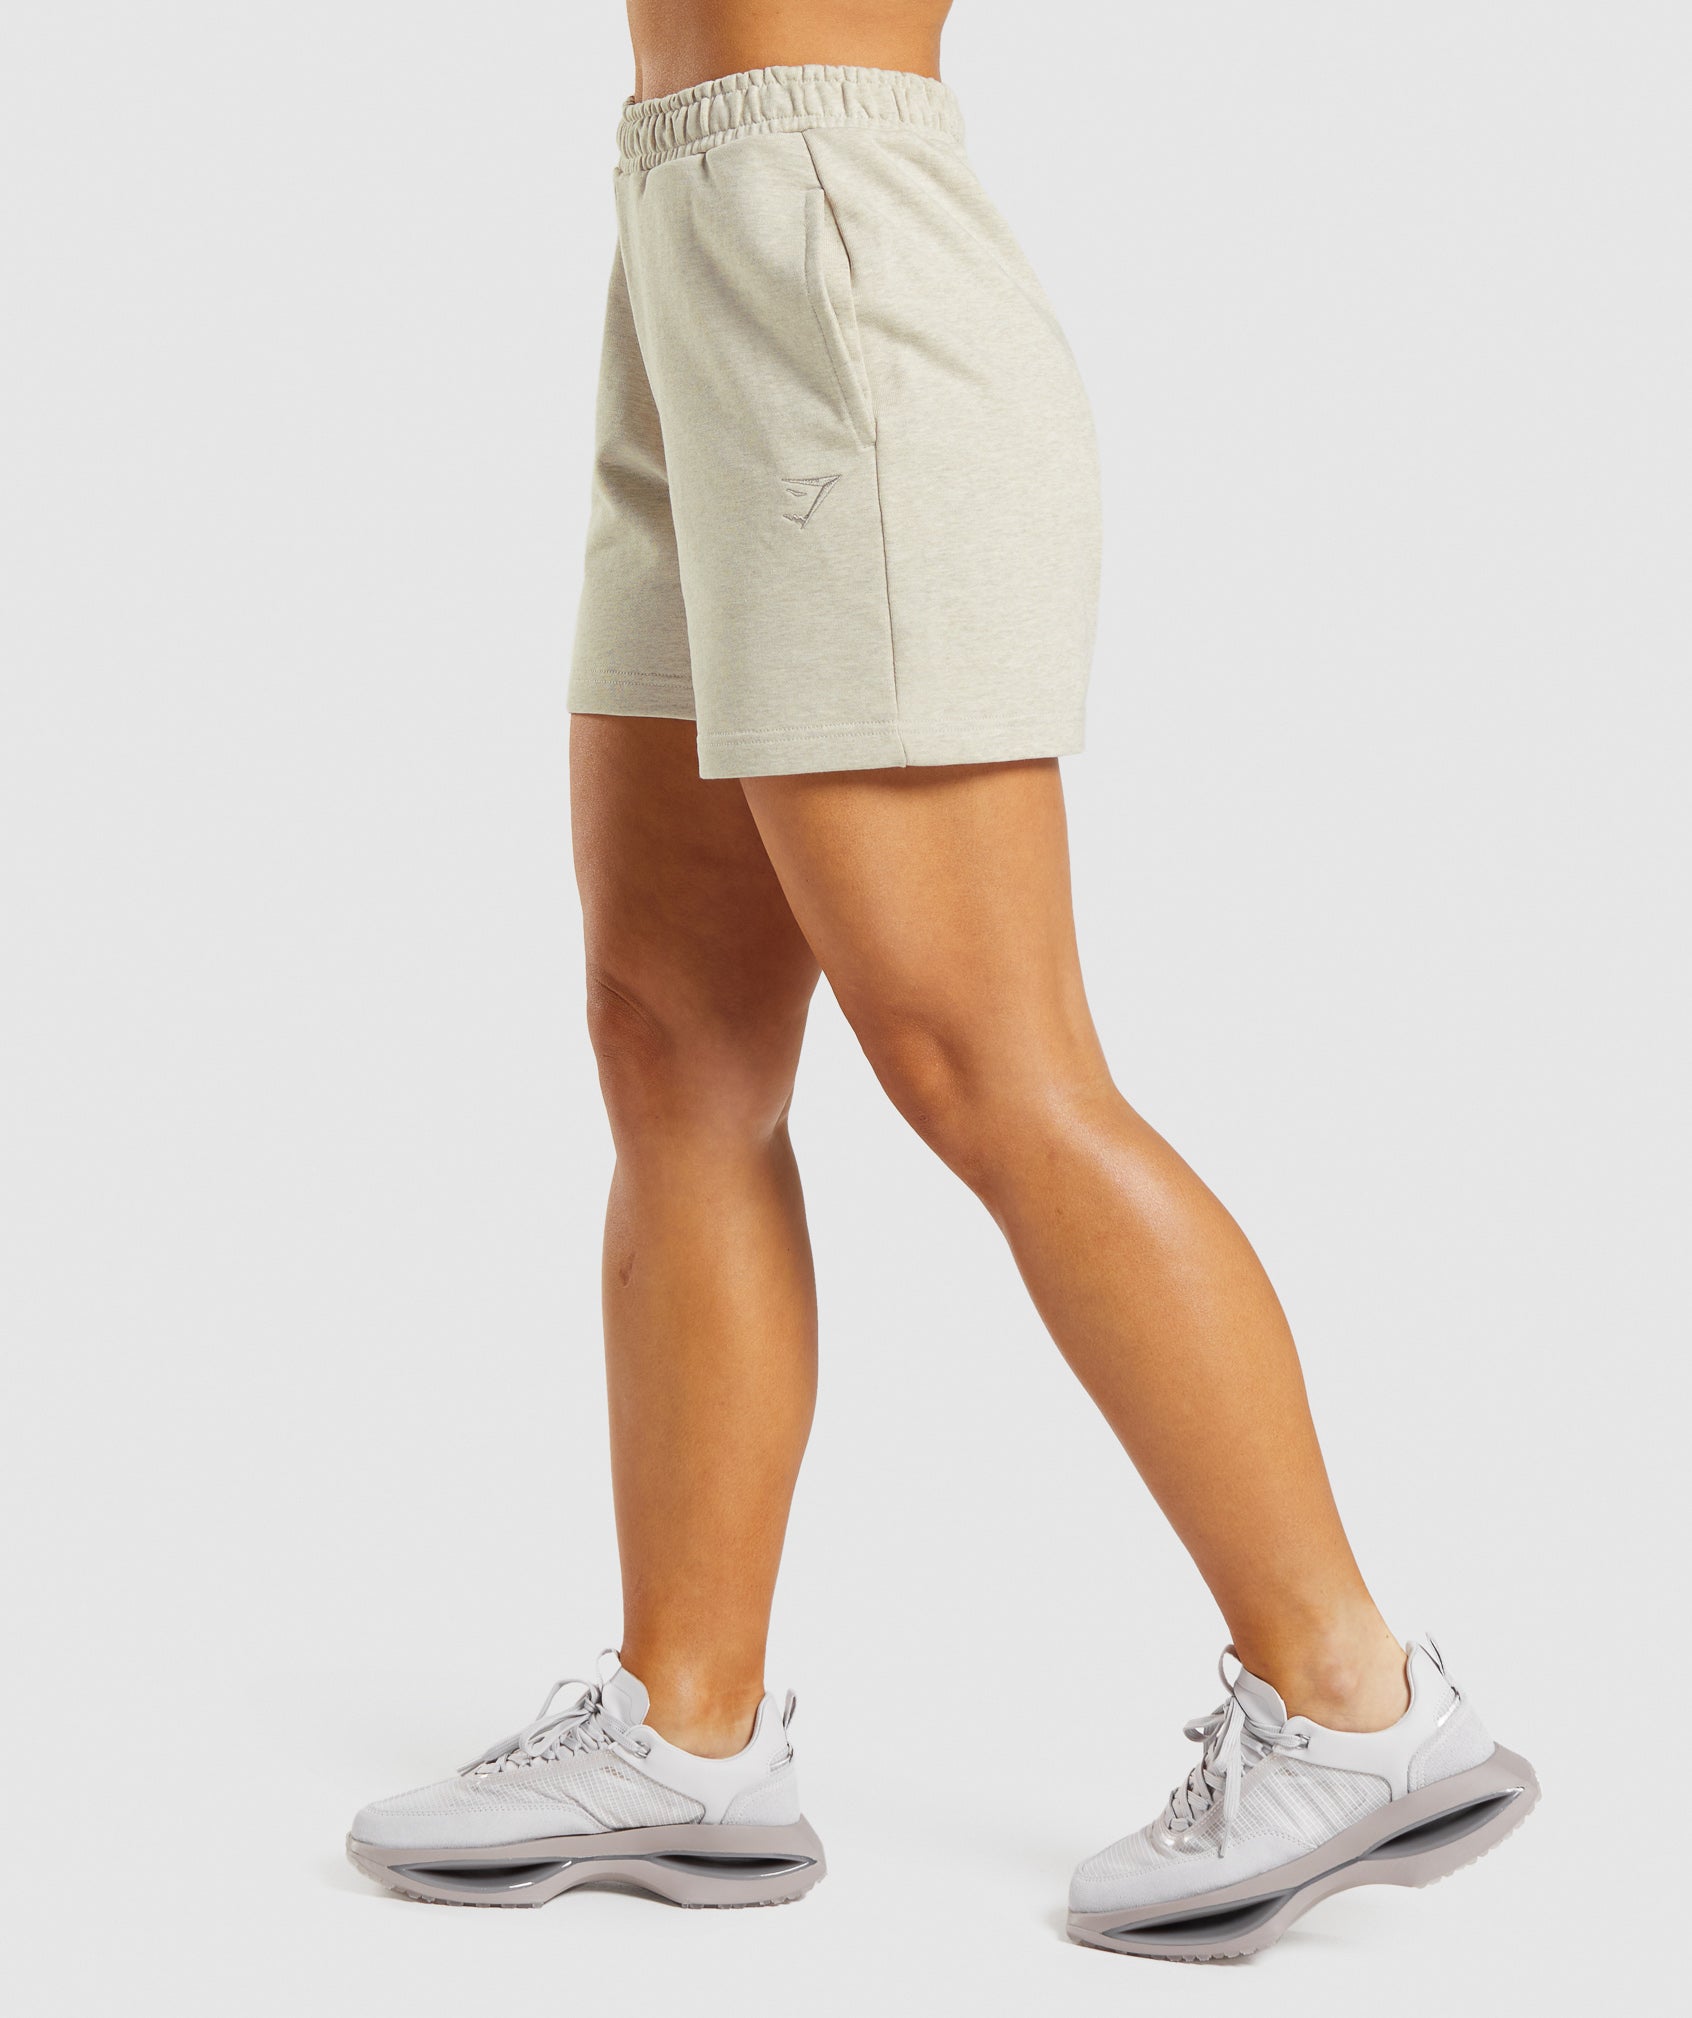 Rest Day Sweats Shorts in Sand Marl